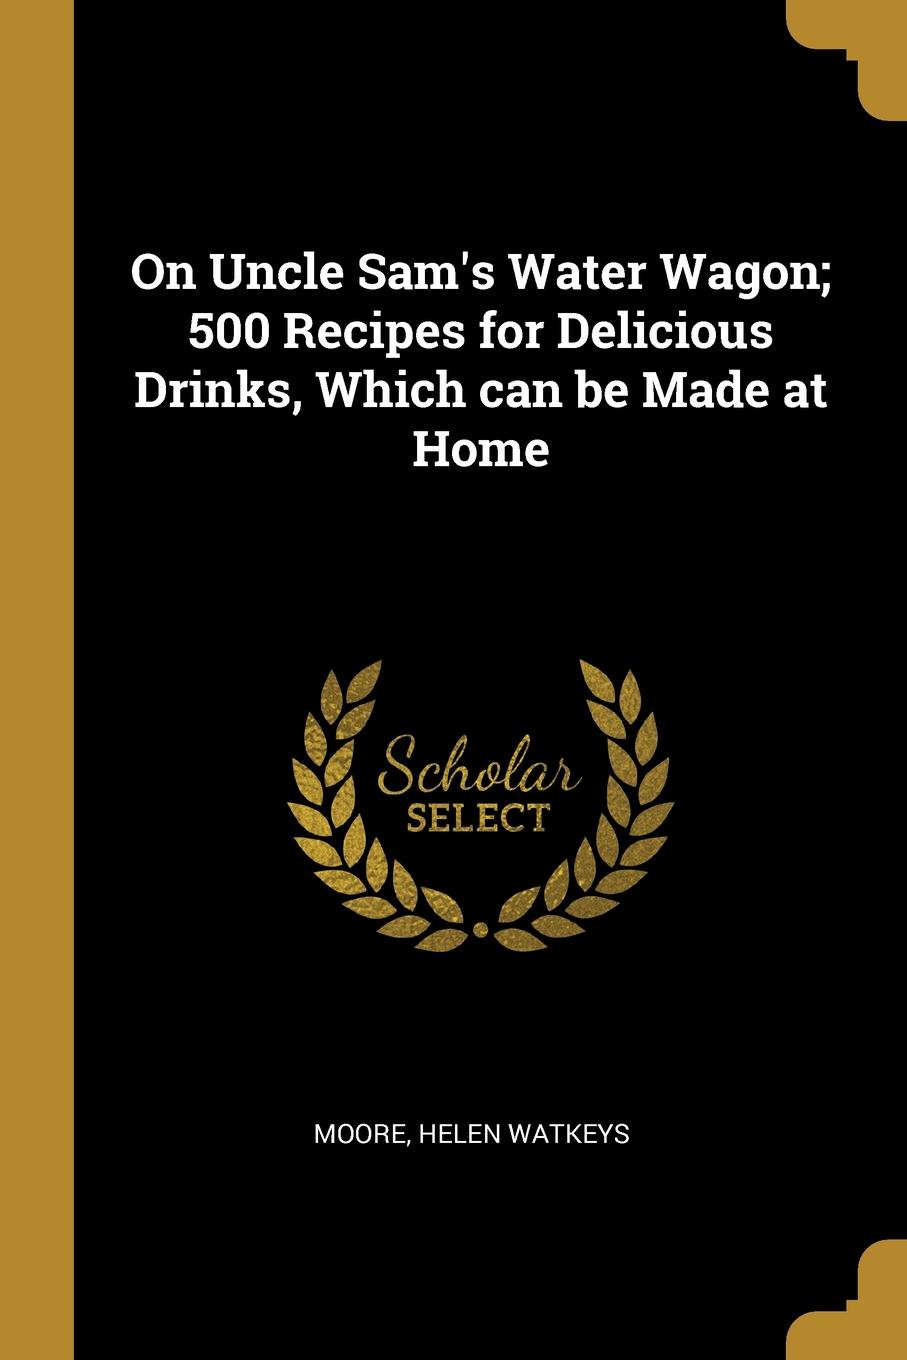 On Uncle Sam.s Water Wagon; 500 Recipes for Delicious Drinks, Which can be Made at Home